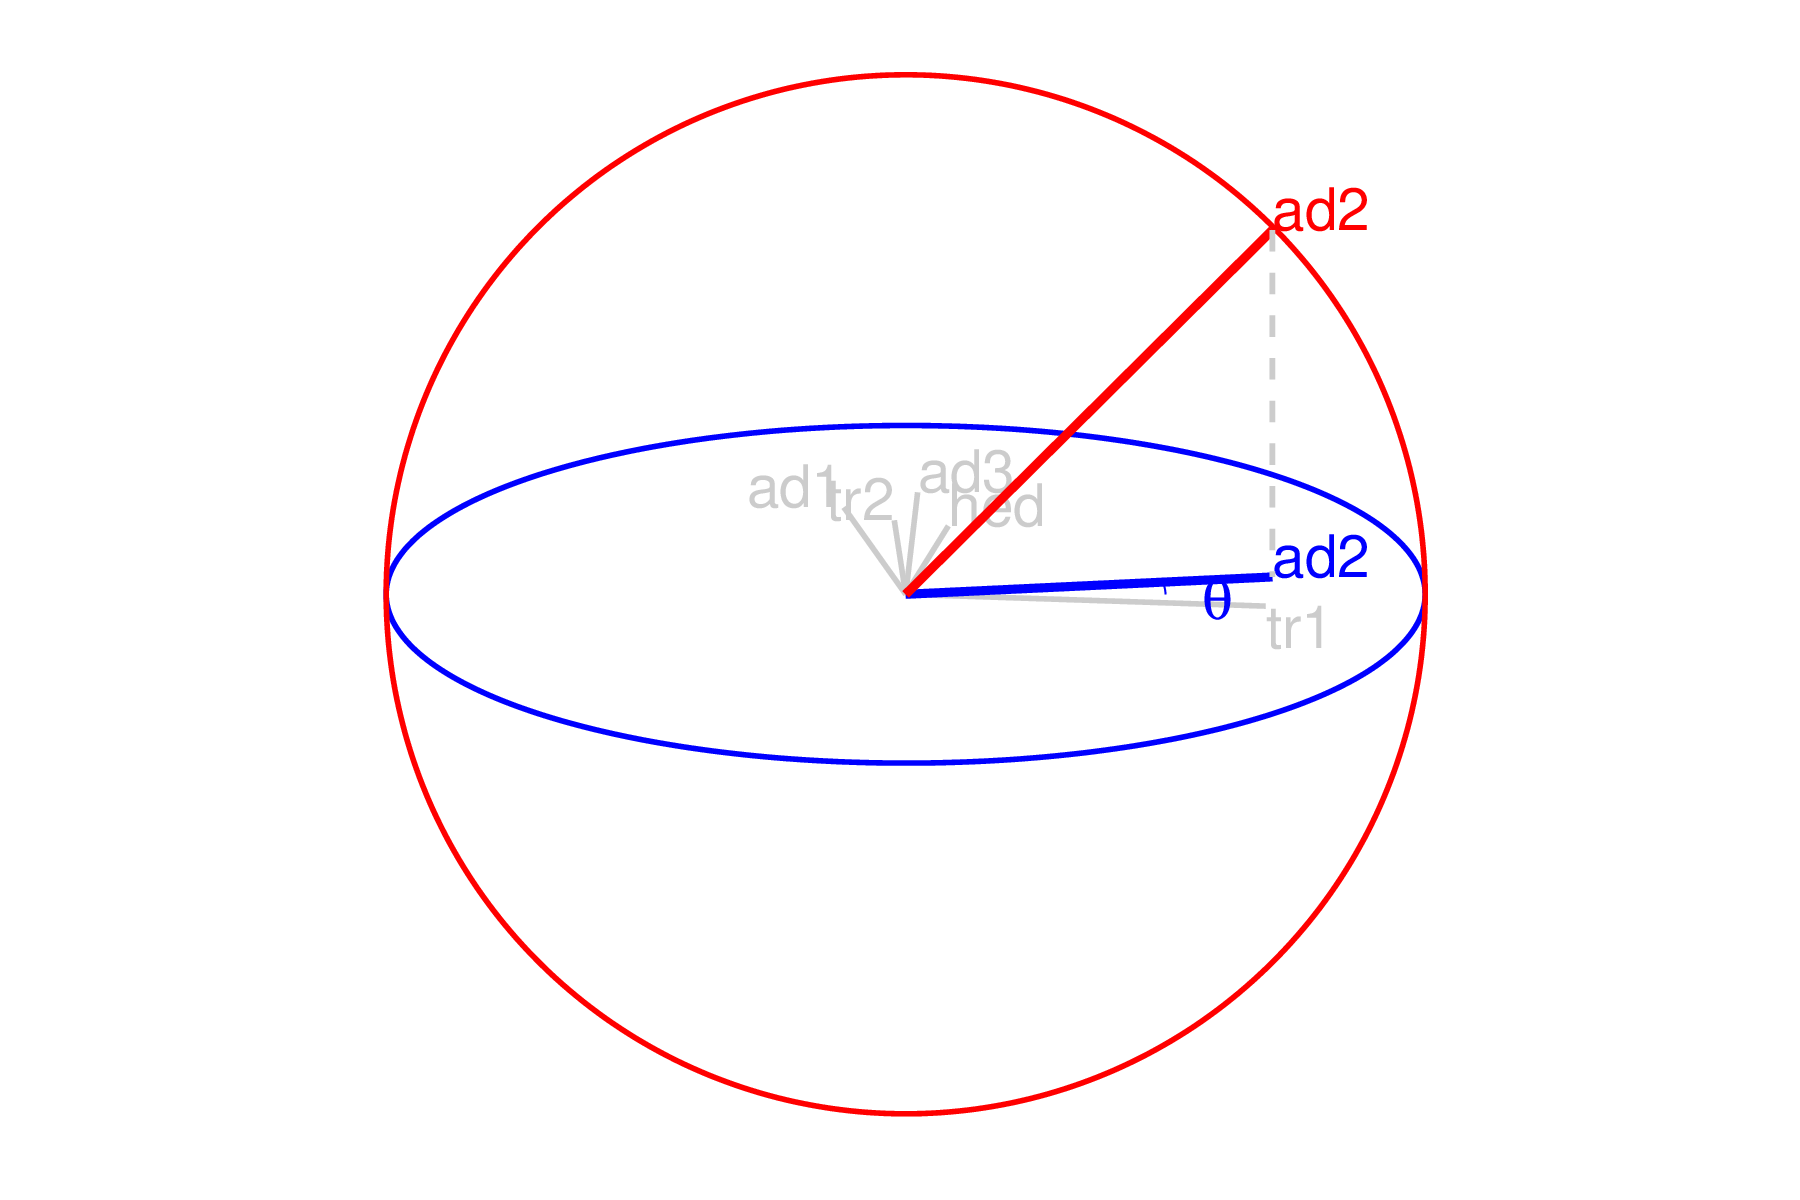 Illustration of a 3D manip space. The projection plane is shown as a blue circle extending into and out of the display. A manipulation direction is initialized, the red circle, orthogonal to the projection plane. This allows the selected variable, `aede2`, to change its contribution to the projection plane. The other variables' contributions rotate into this space, preserving the orthogonal basis, but are omitted in the manipulation dimension for simplicity.